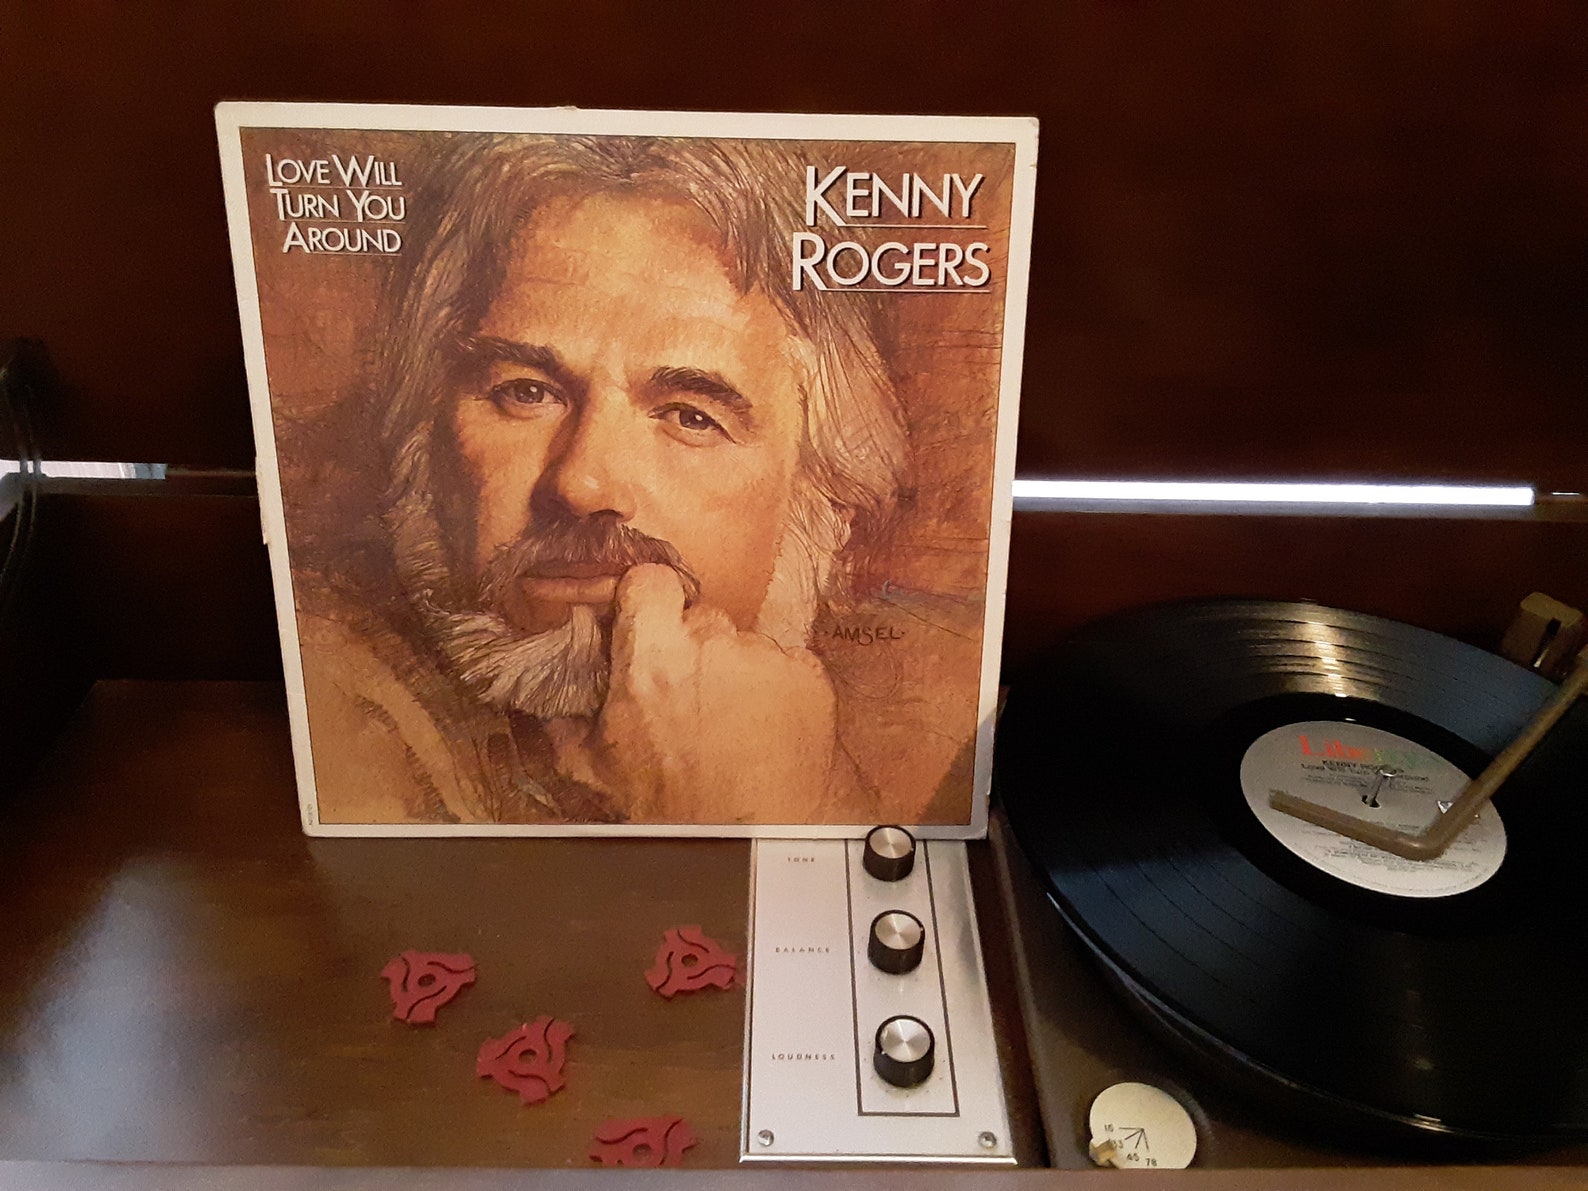 Kenny Rogers Love Will Turn You Around Circa 1982 - Etsy